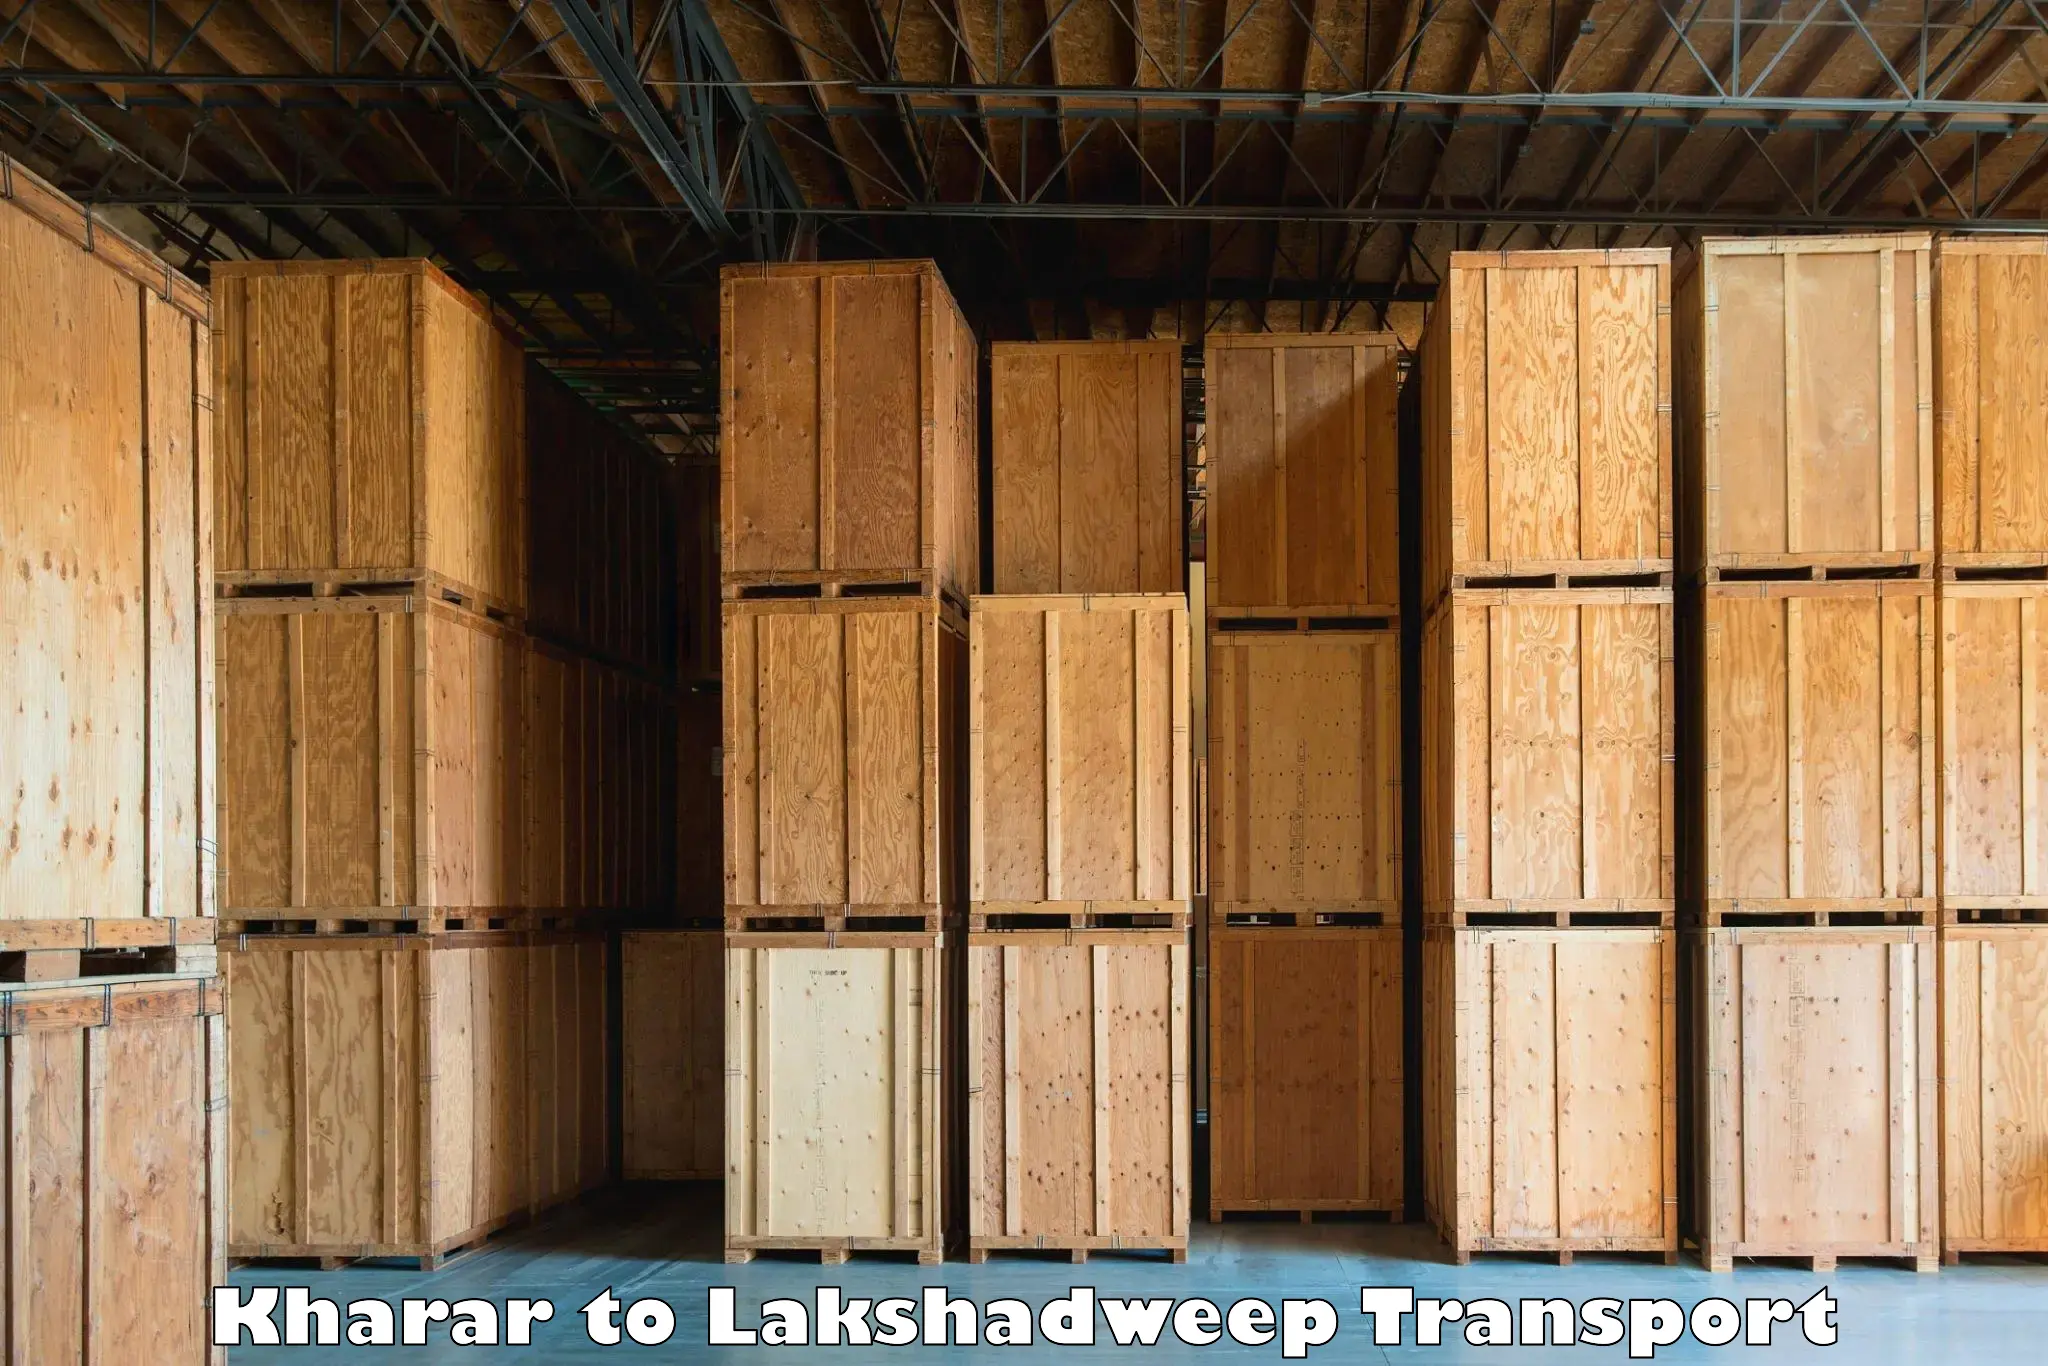 Best transport services in India Kharar to Lakshadweep